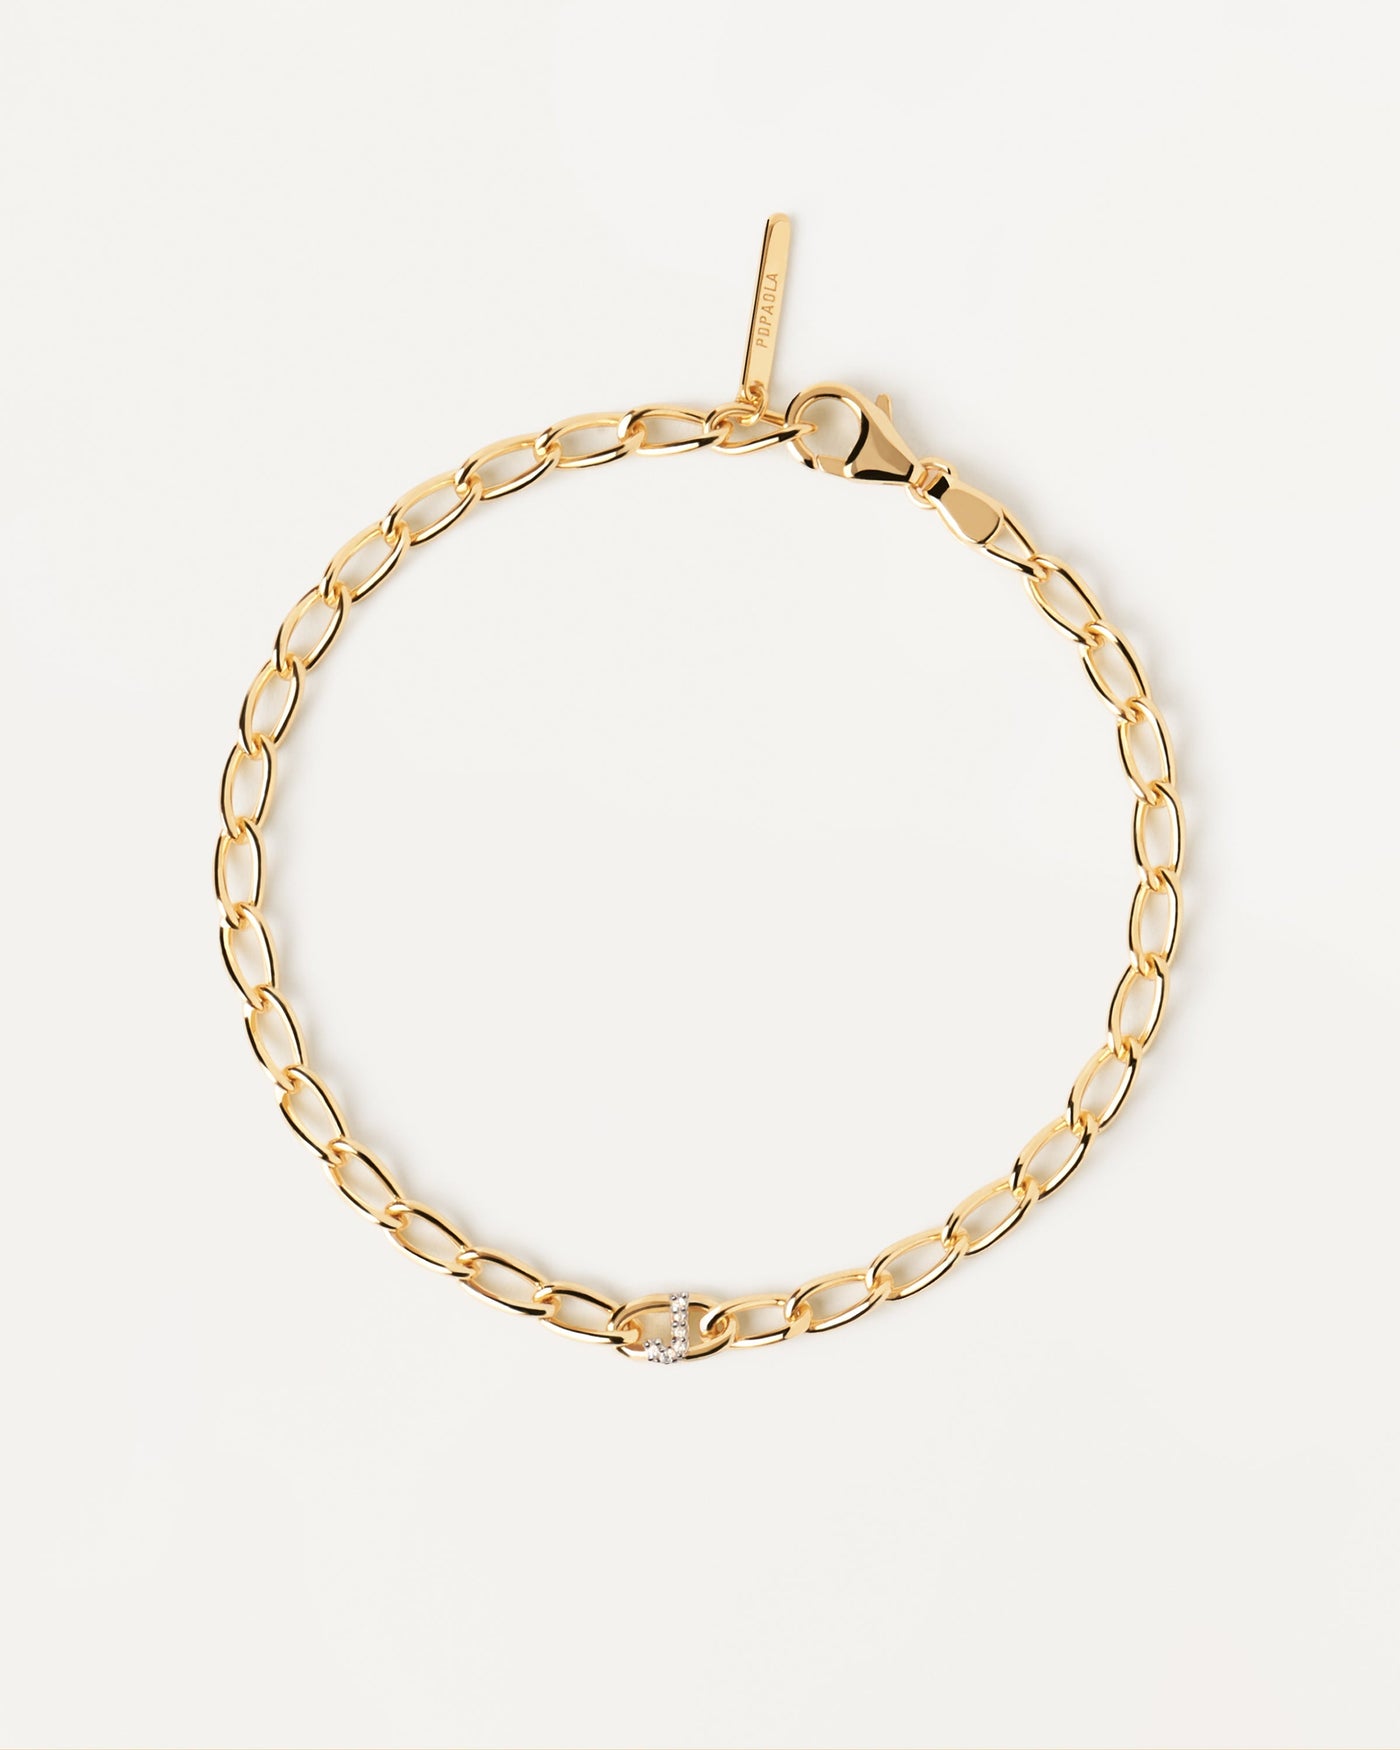 2023 Selection | Letter J Chain Bracelet. cable chain bracelet in gold-plated silver with initial J in zirconia. Get the latest arrival from PDPAOLA. Place your order safely and get this Best Seller. Free Shipping.